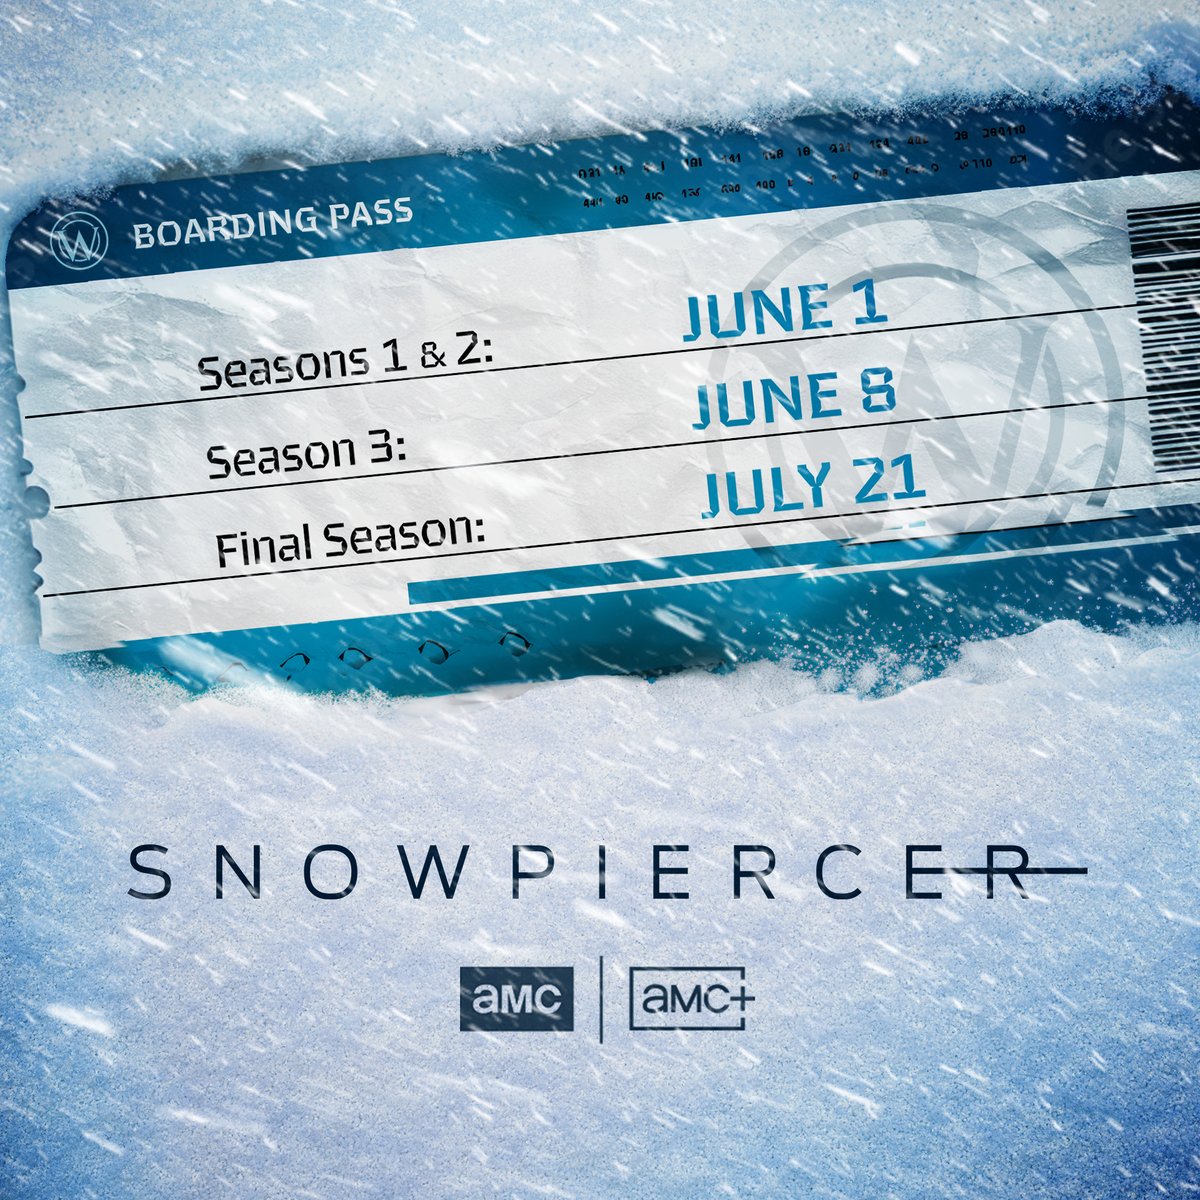 We've got your ticket to ride... #Snowpiercer's new home is AMC and AMC+.